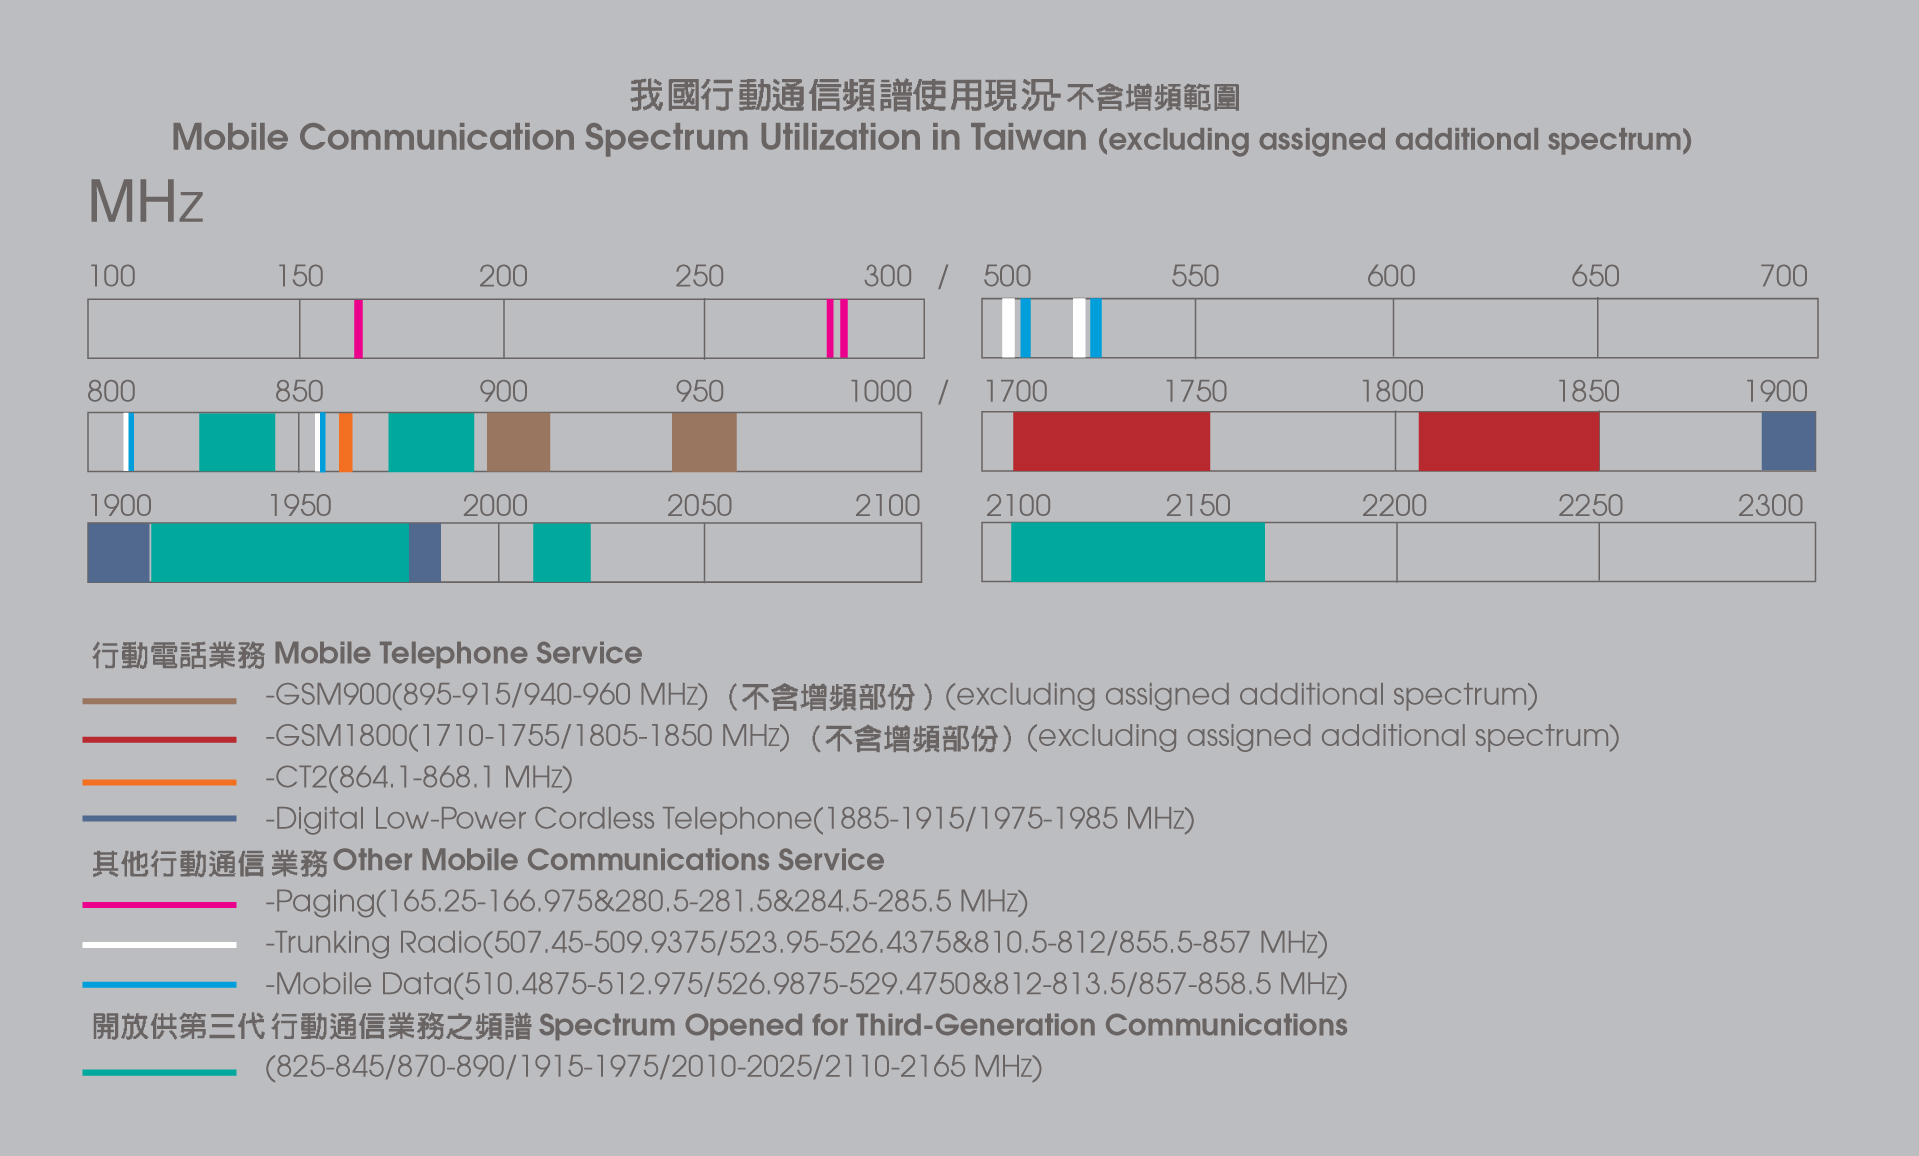 Mobile Communication Spectrum Utilization in Taiwan (excluding assigned additional spectrum